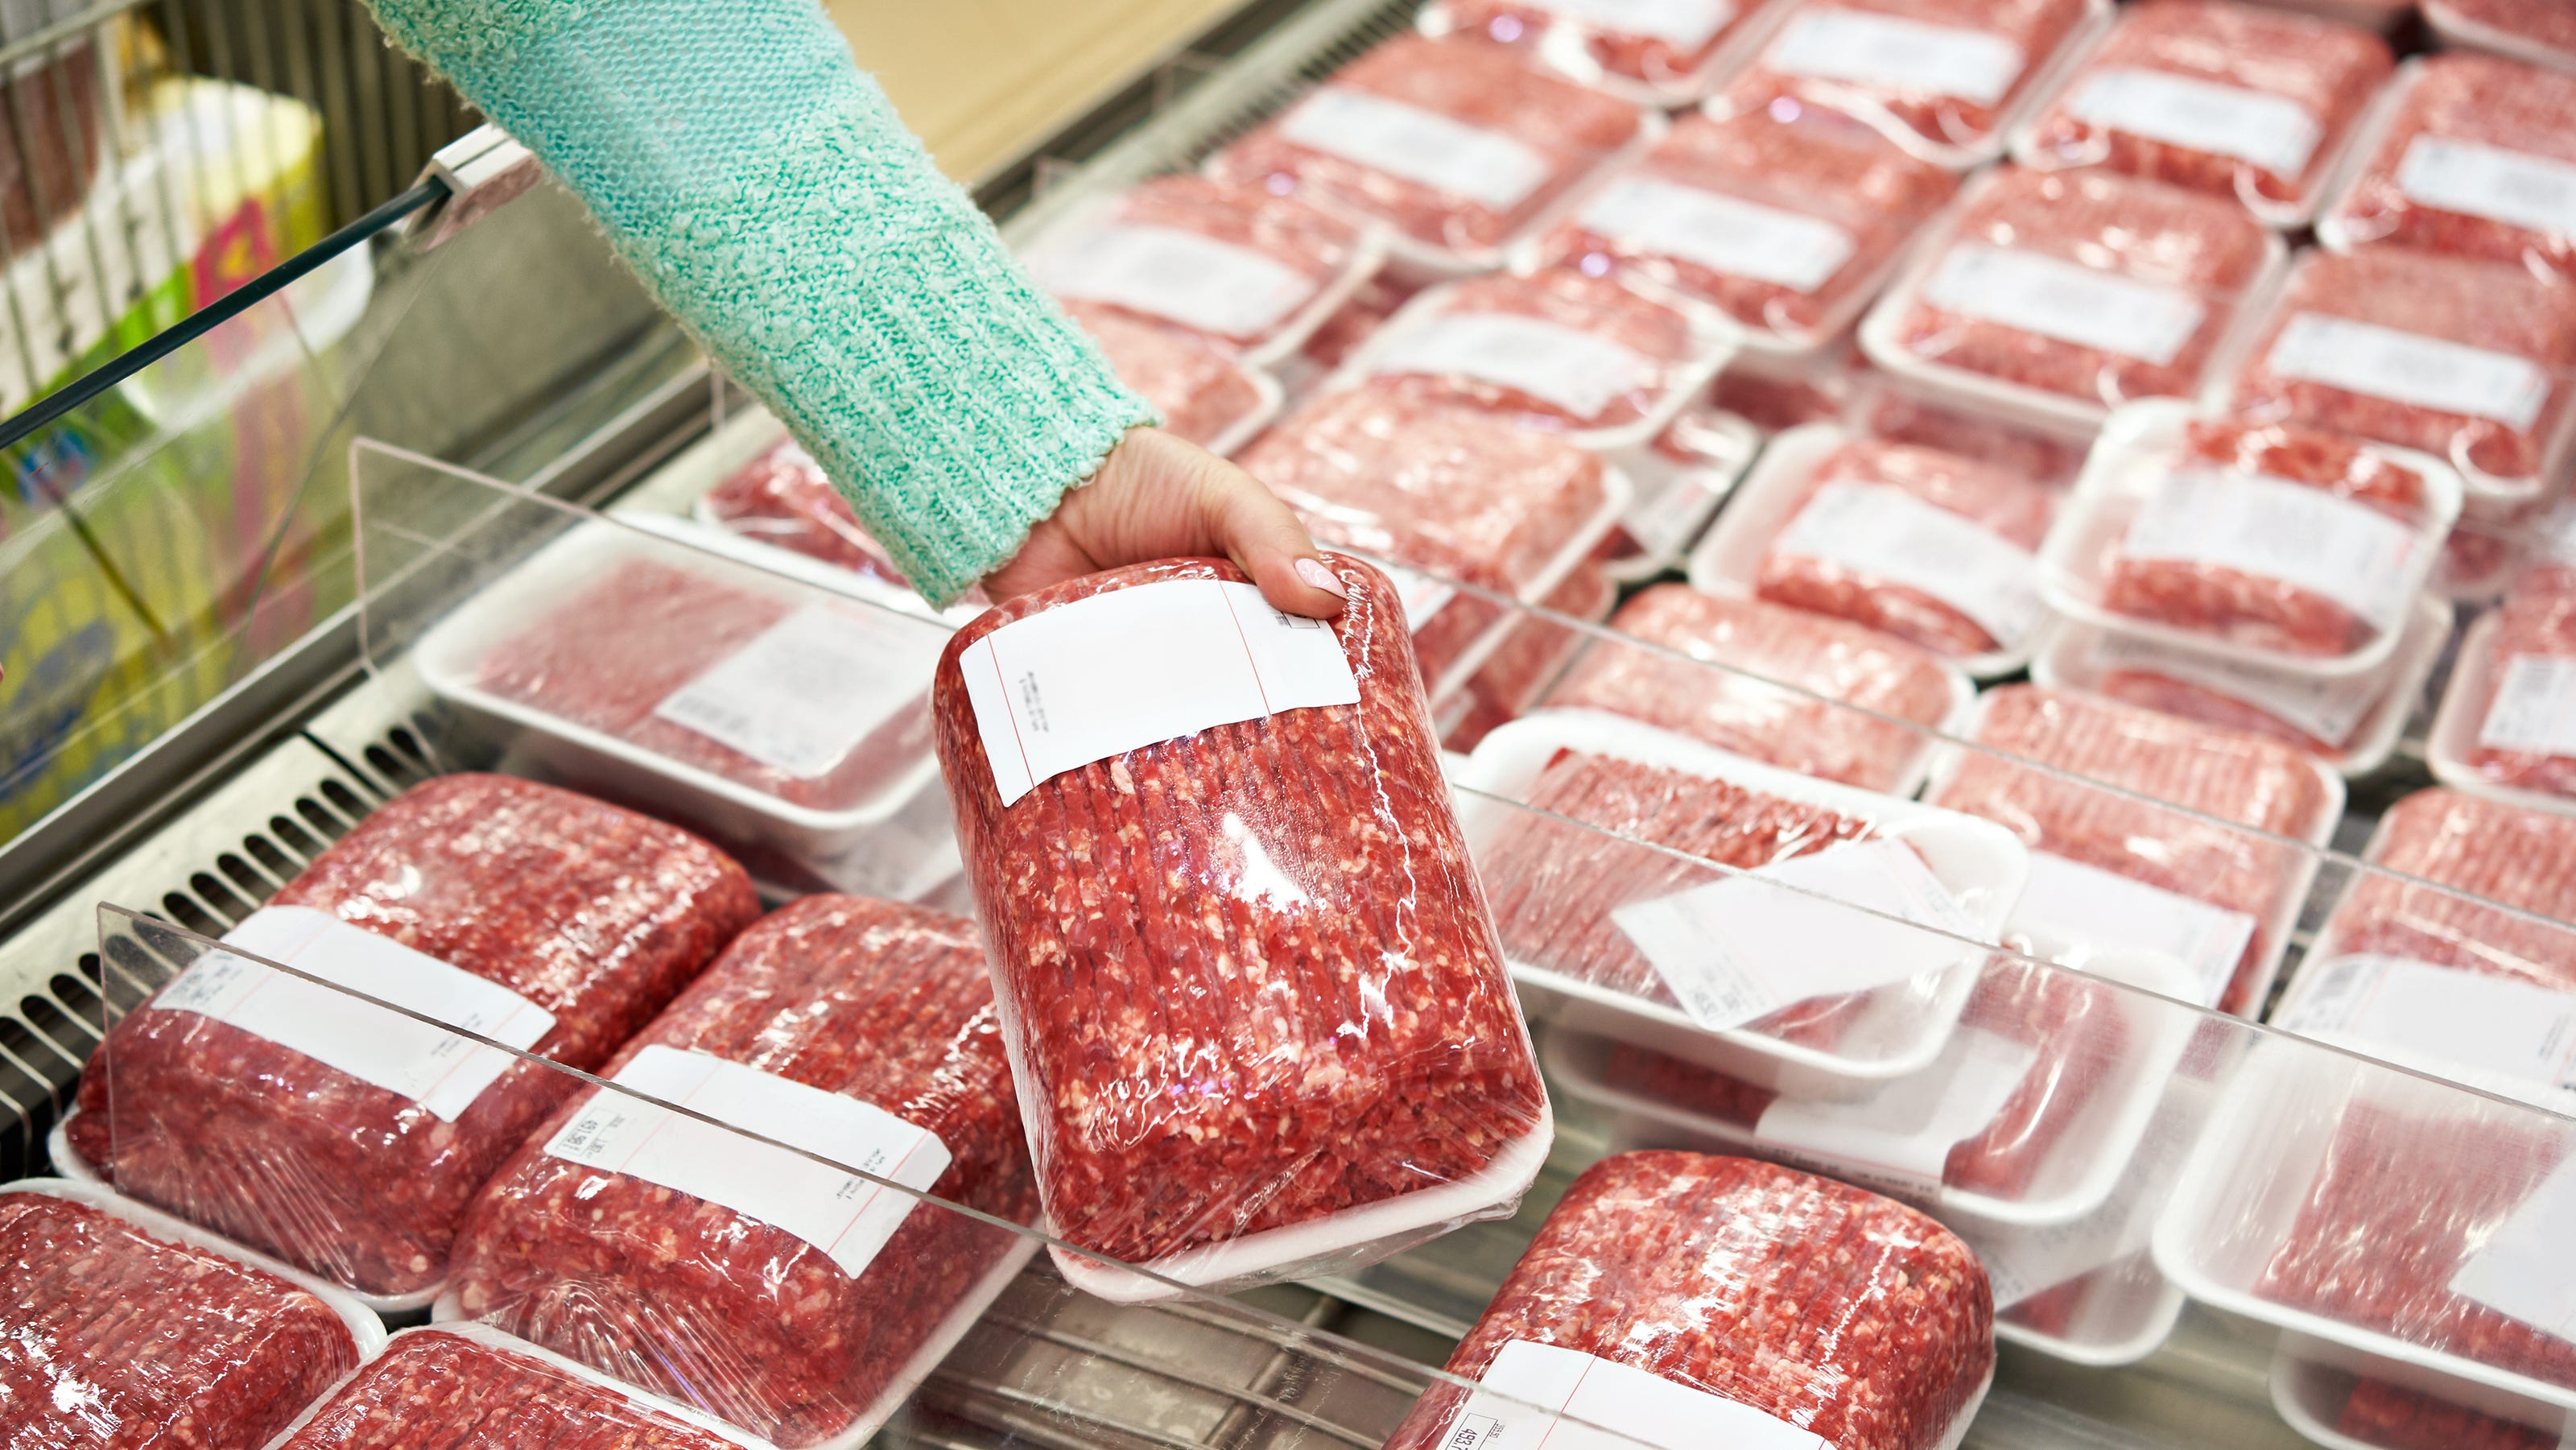 Public health alert issued over ground beef that may be contaminated with E. coli - USA TODAY